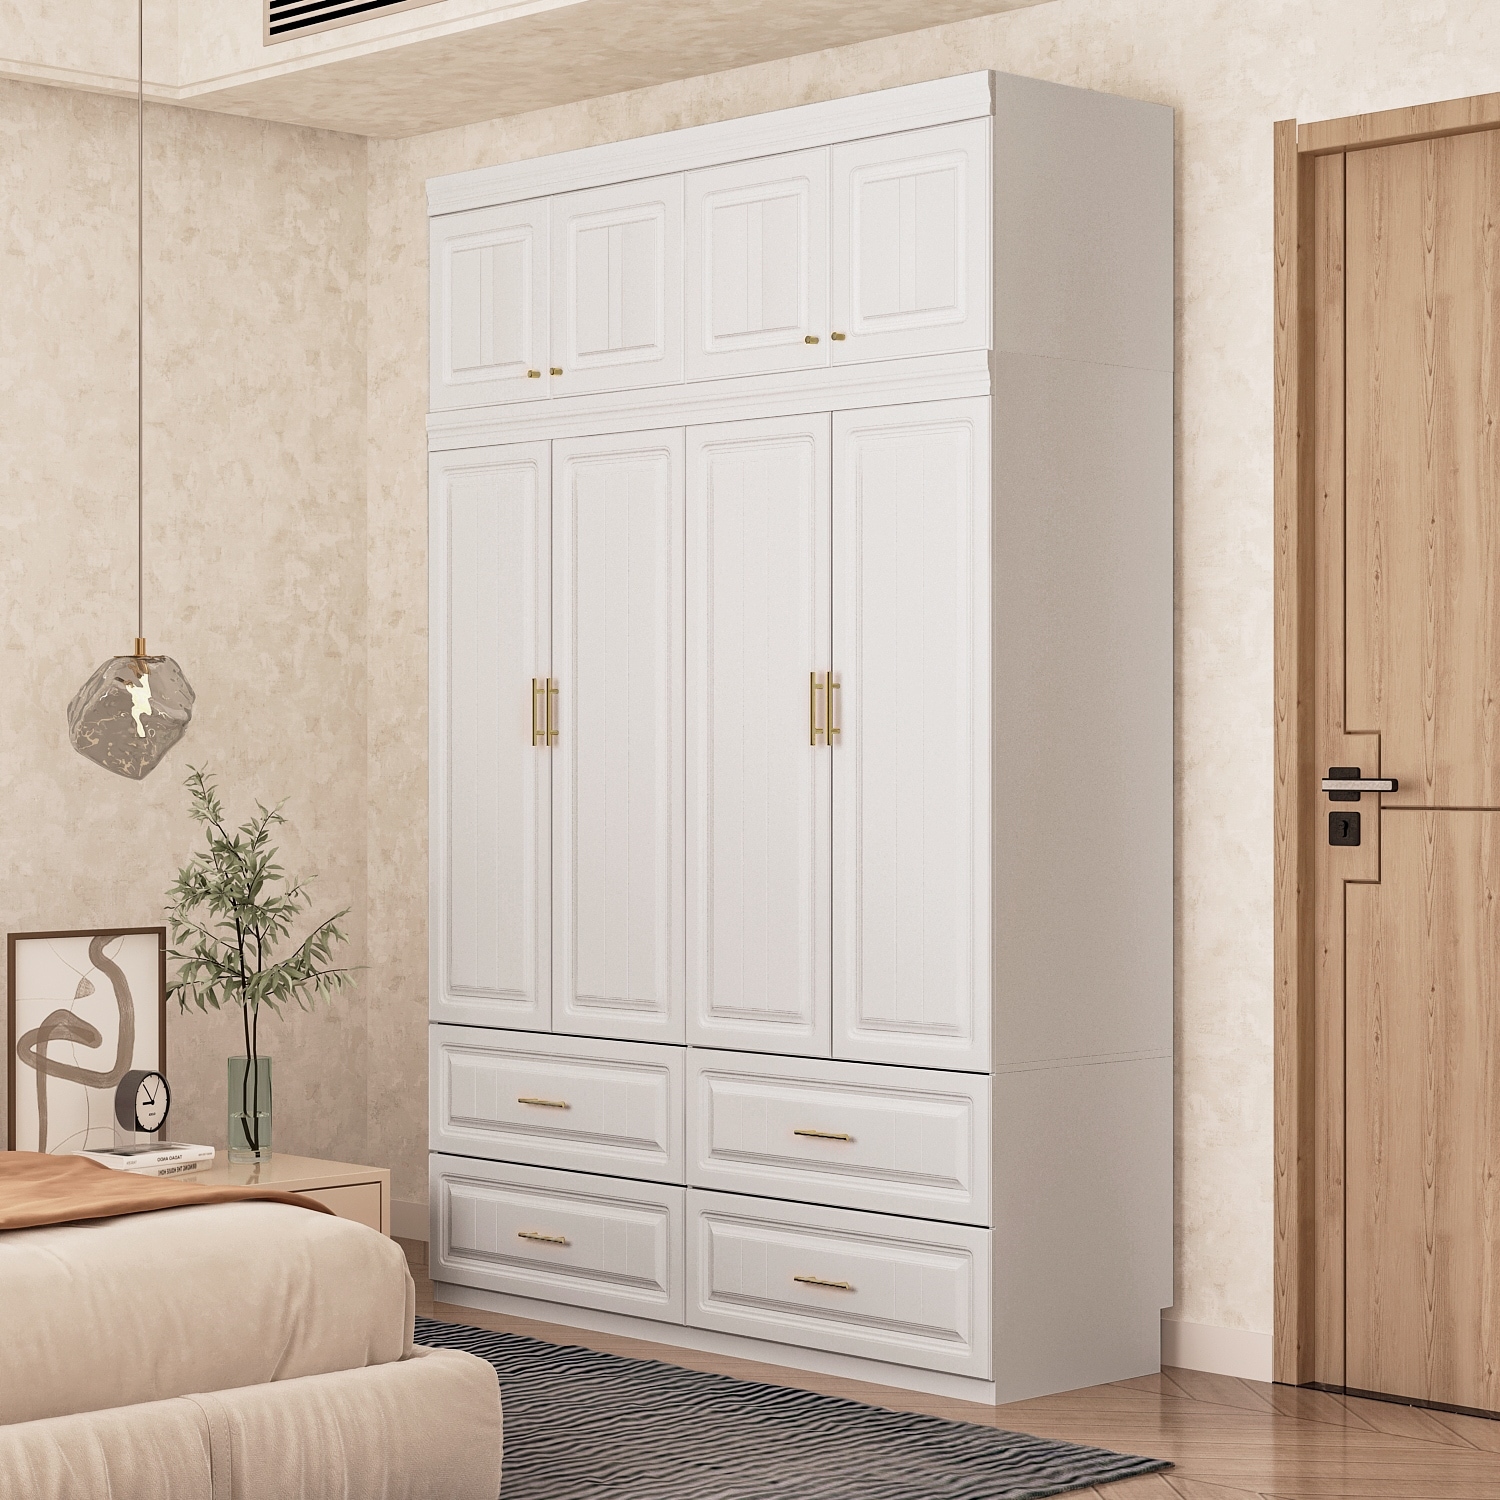 https://ak1.ostkcdn.com/images/products/is/images/direct/787fe8f64df6668a0a8c91635e9738fde6113d11/93.9%22H-Armoires-Wardrobes-Closet-Cabinet-With-Hanging-4-Drawer-Storage.jpg